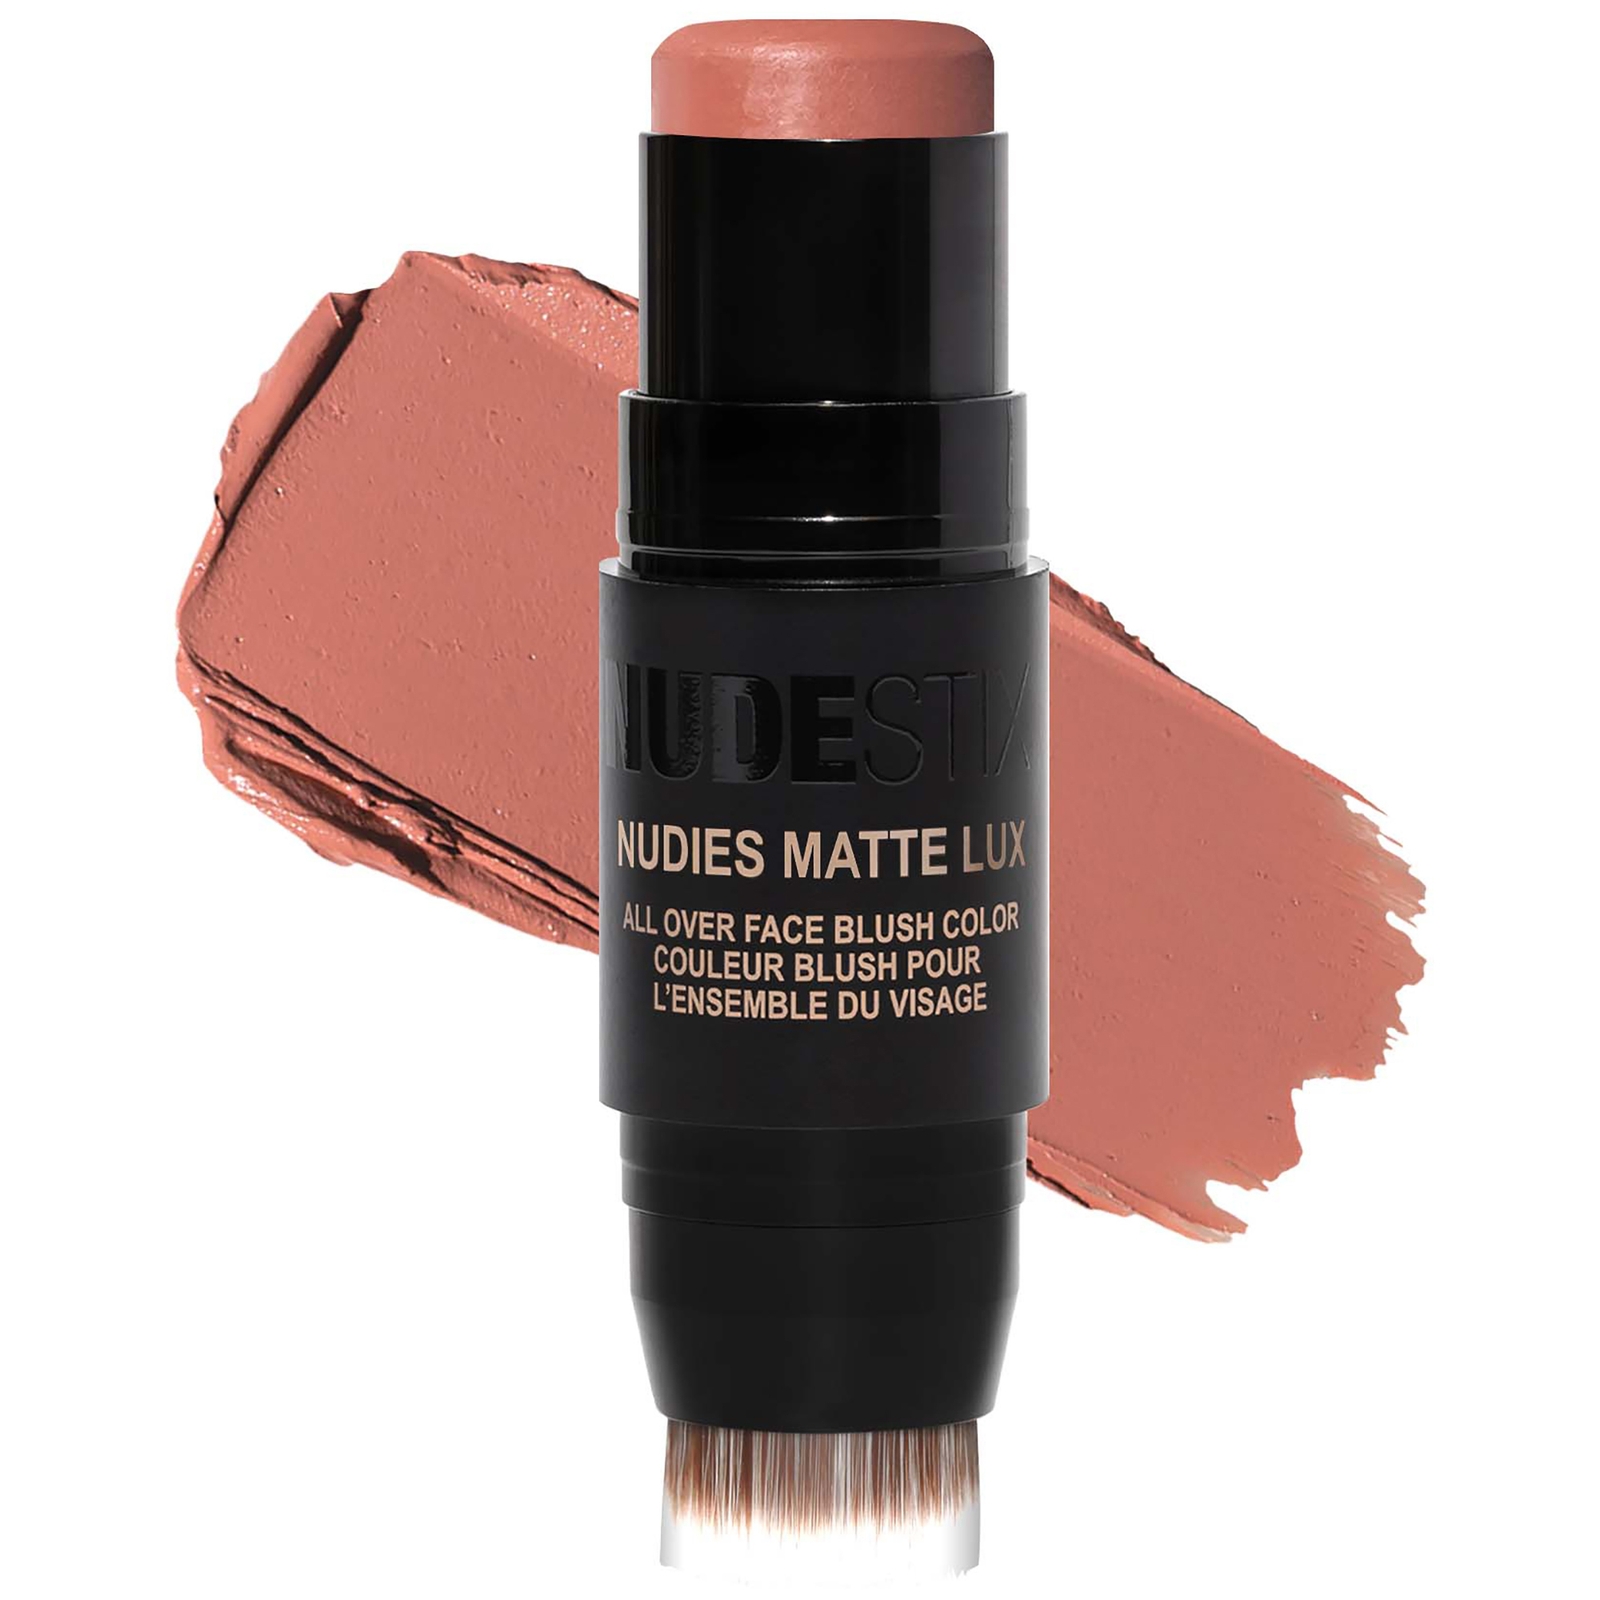 Image of NUDESTIX Nudies Matte Lux All Over Face Blush Colour 7g (Various Shades) - Nude Buff